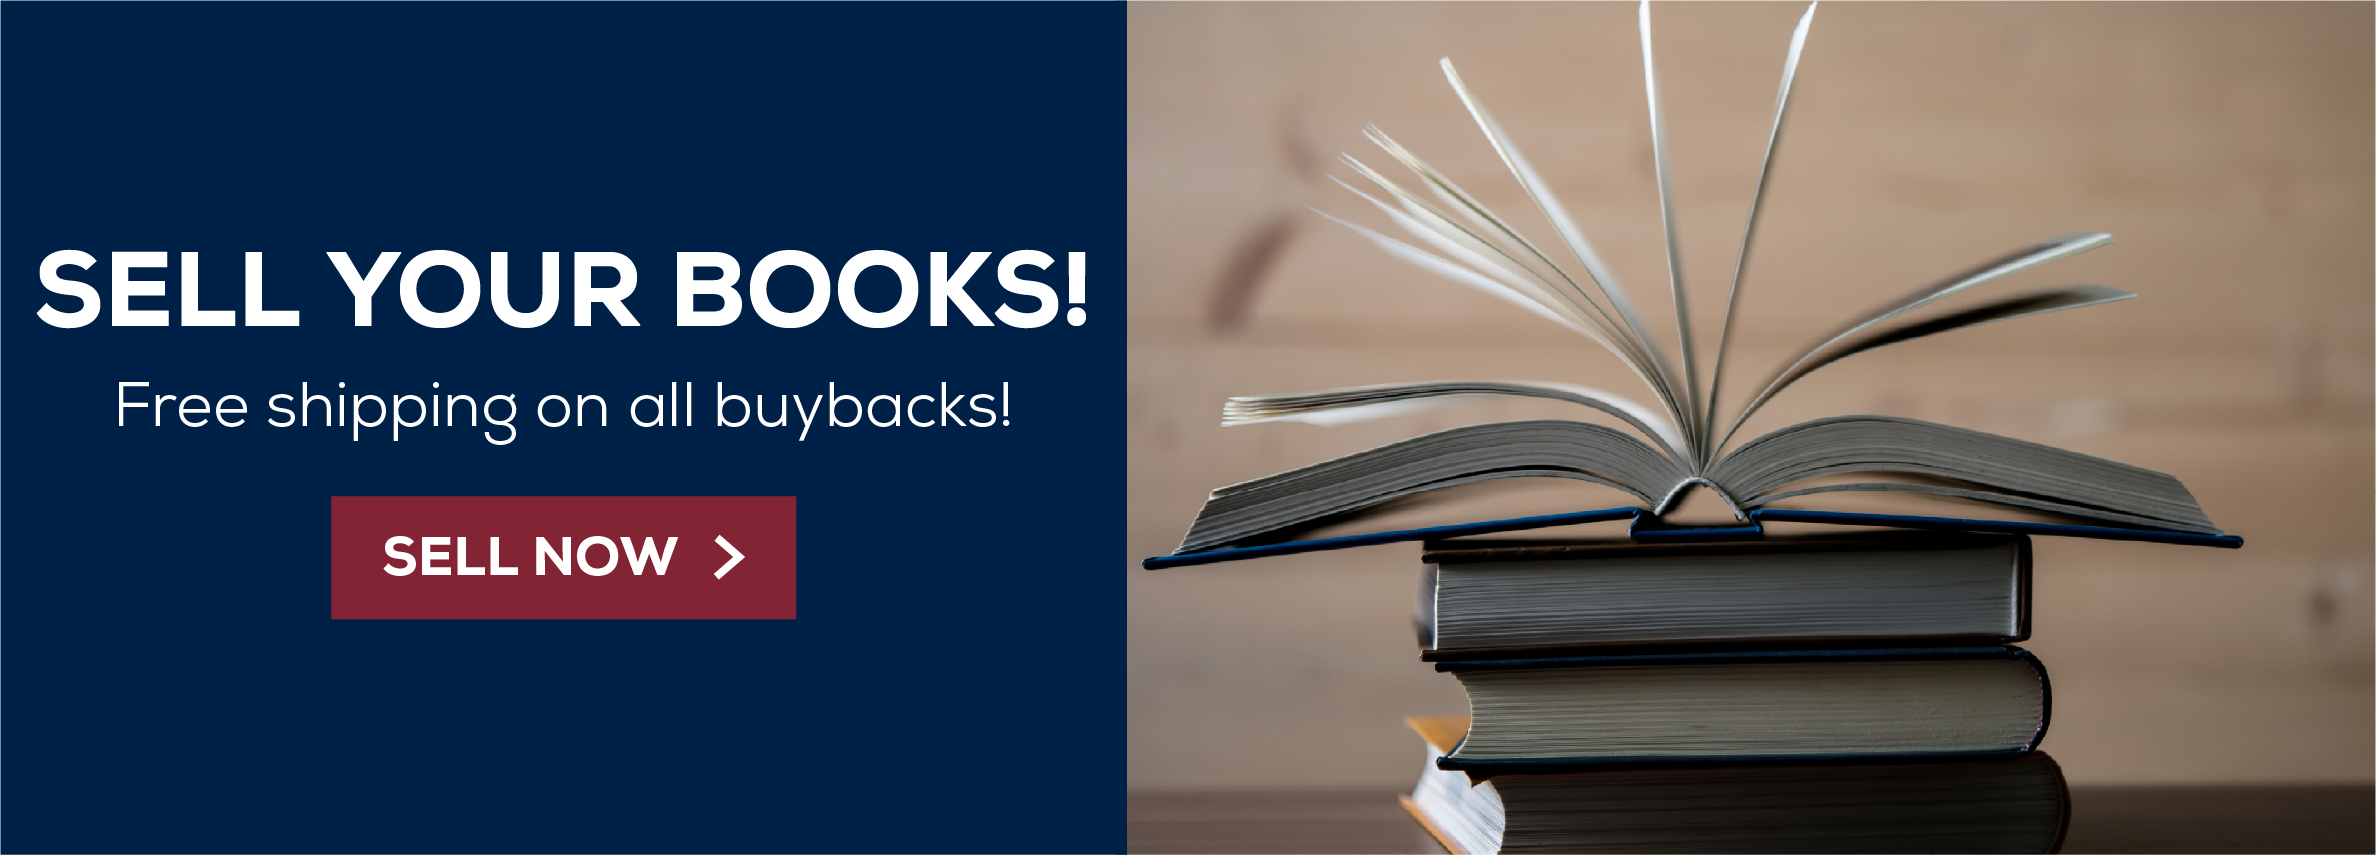 Sell your books! Free shipping on all buybacks! sell now